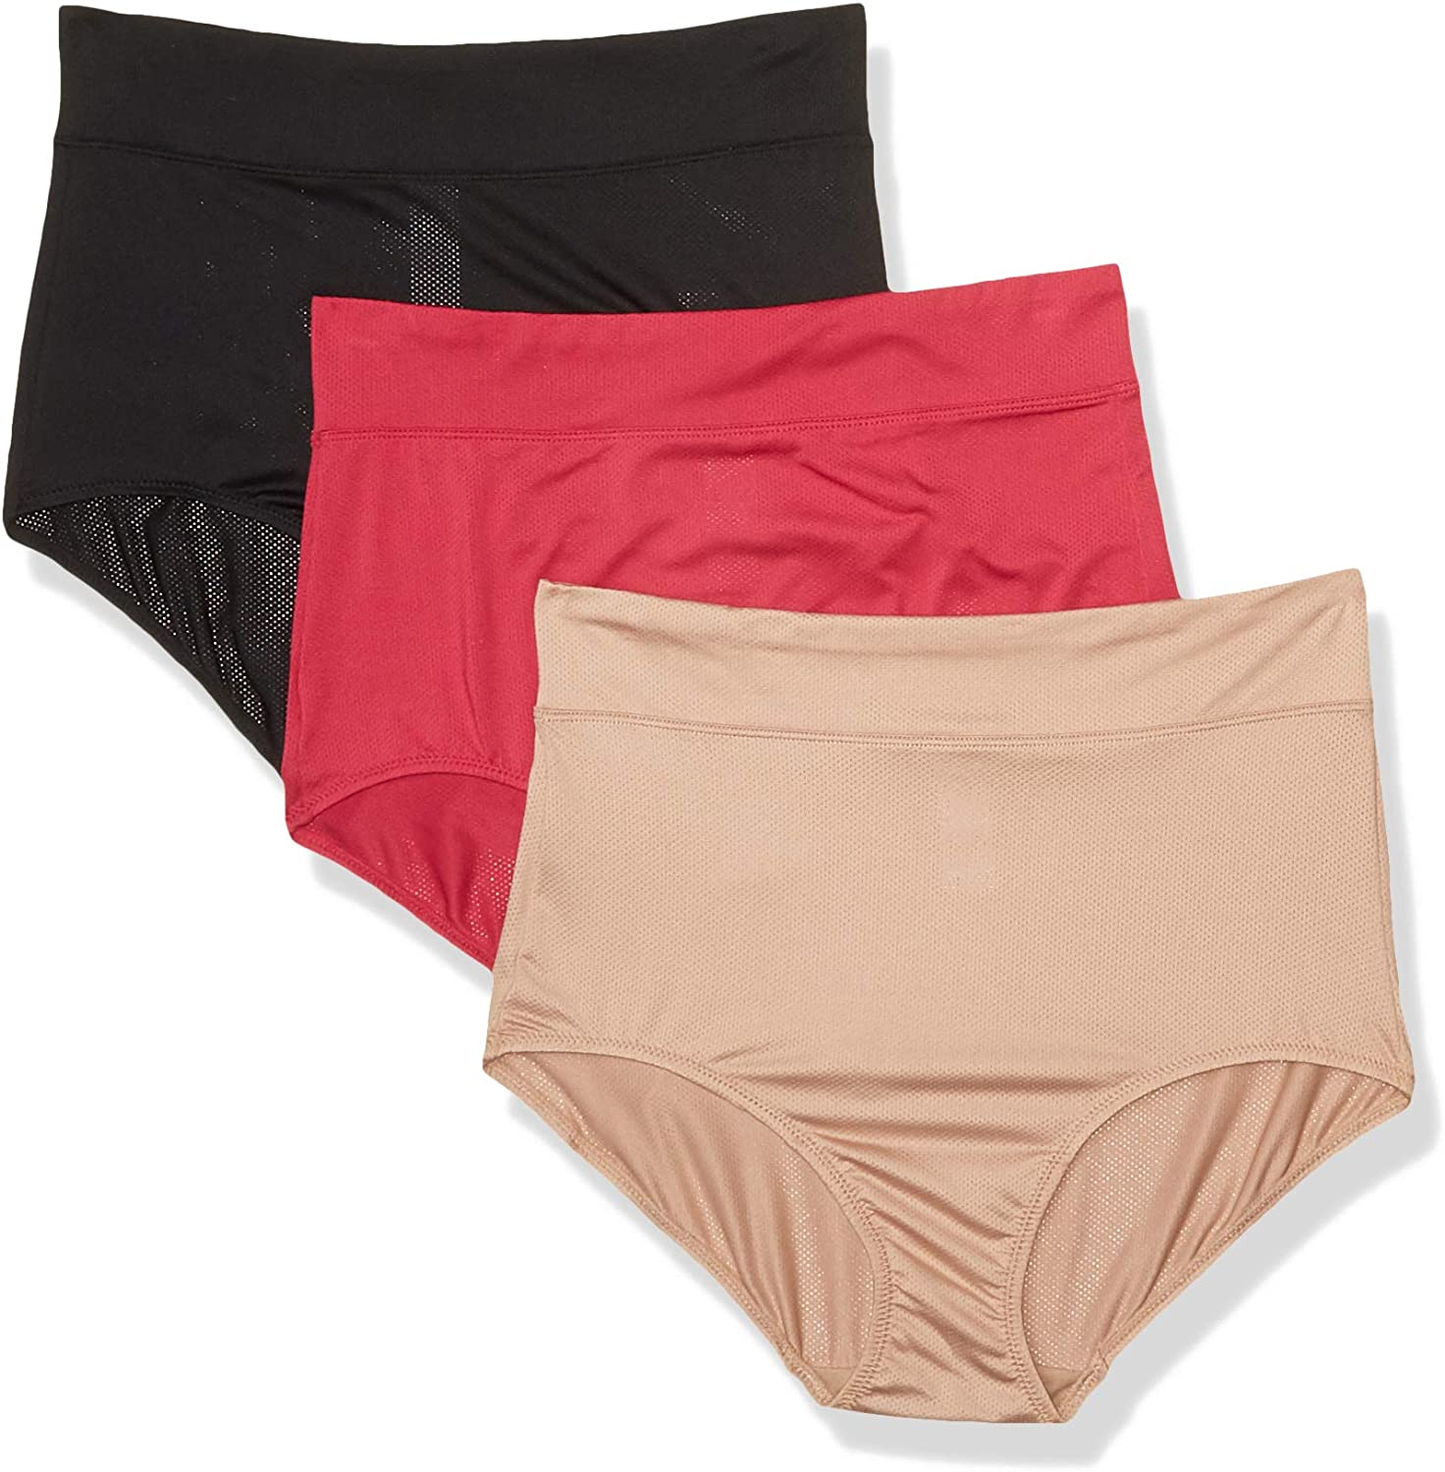 Women's Blissful Benefits Breathable Moisture-Wicking Microfiber Brief Rs4963W